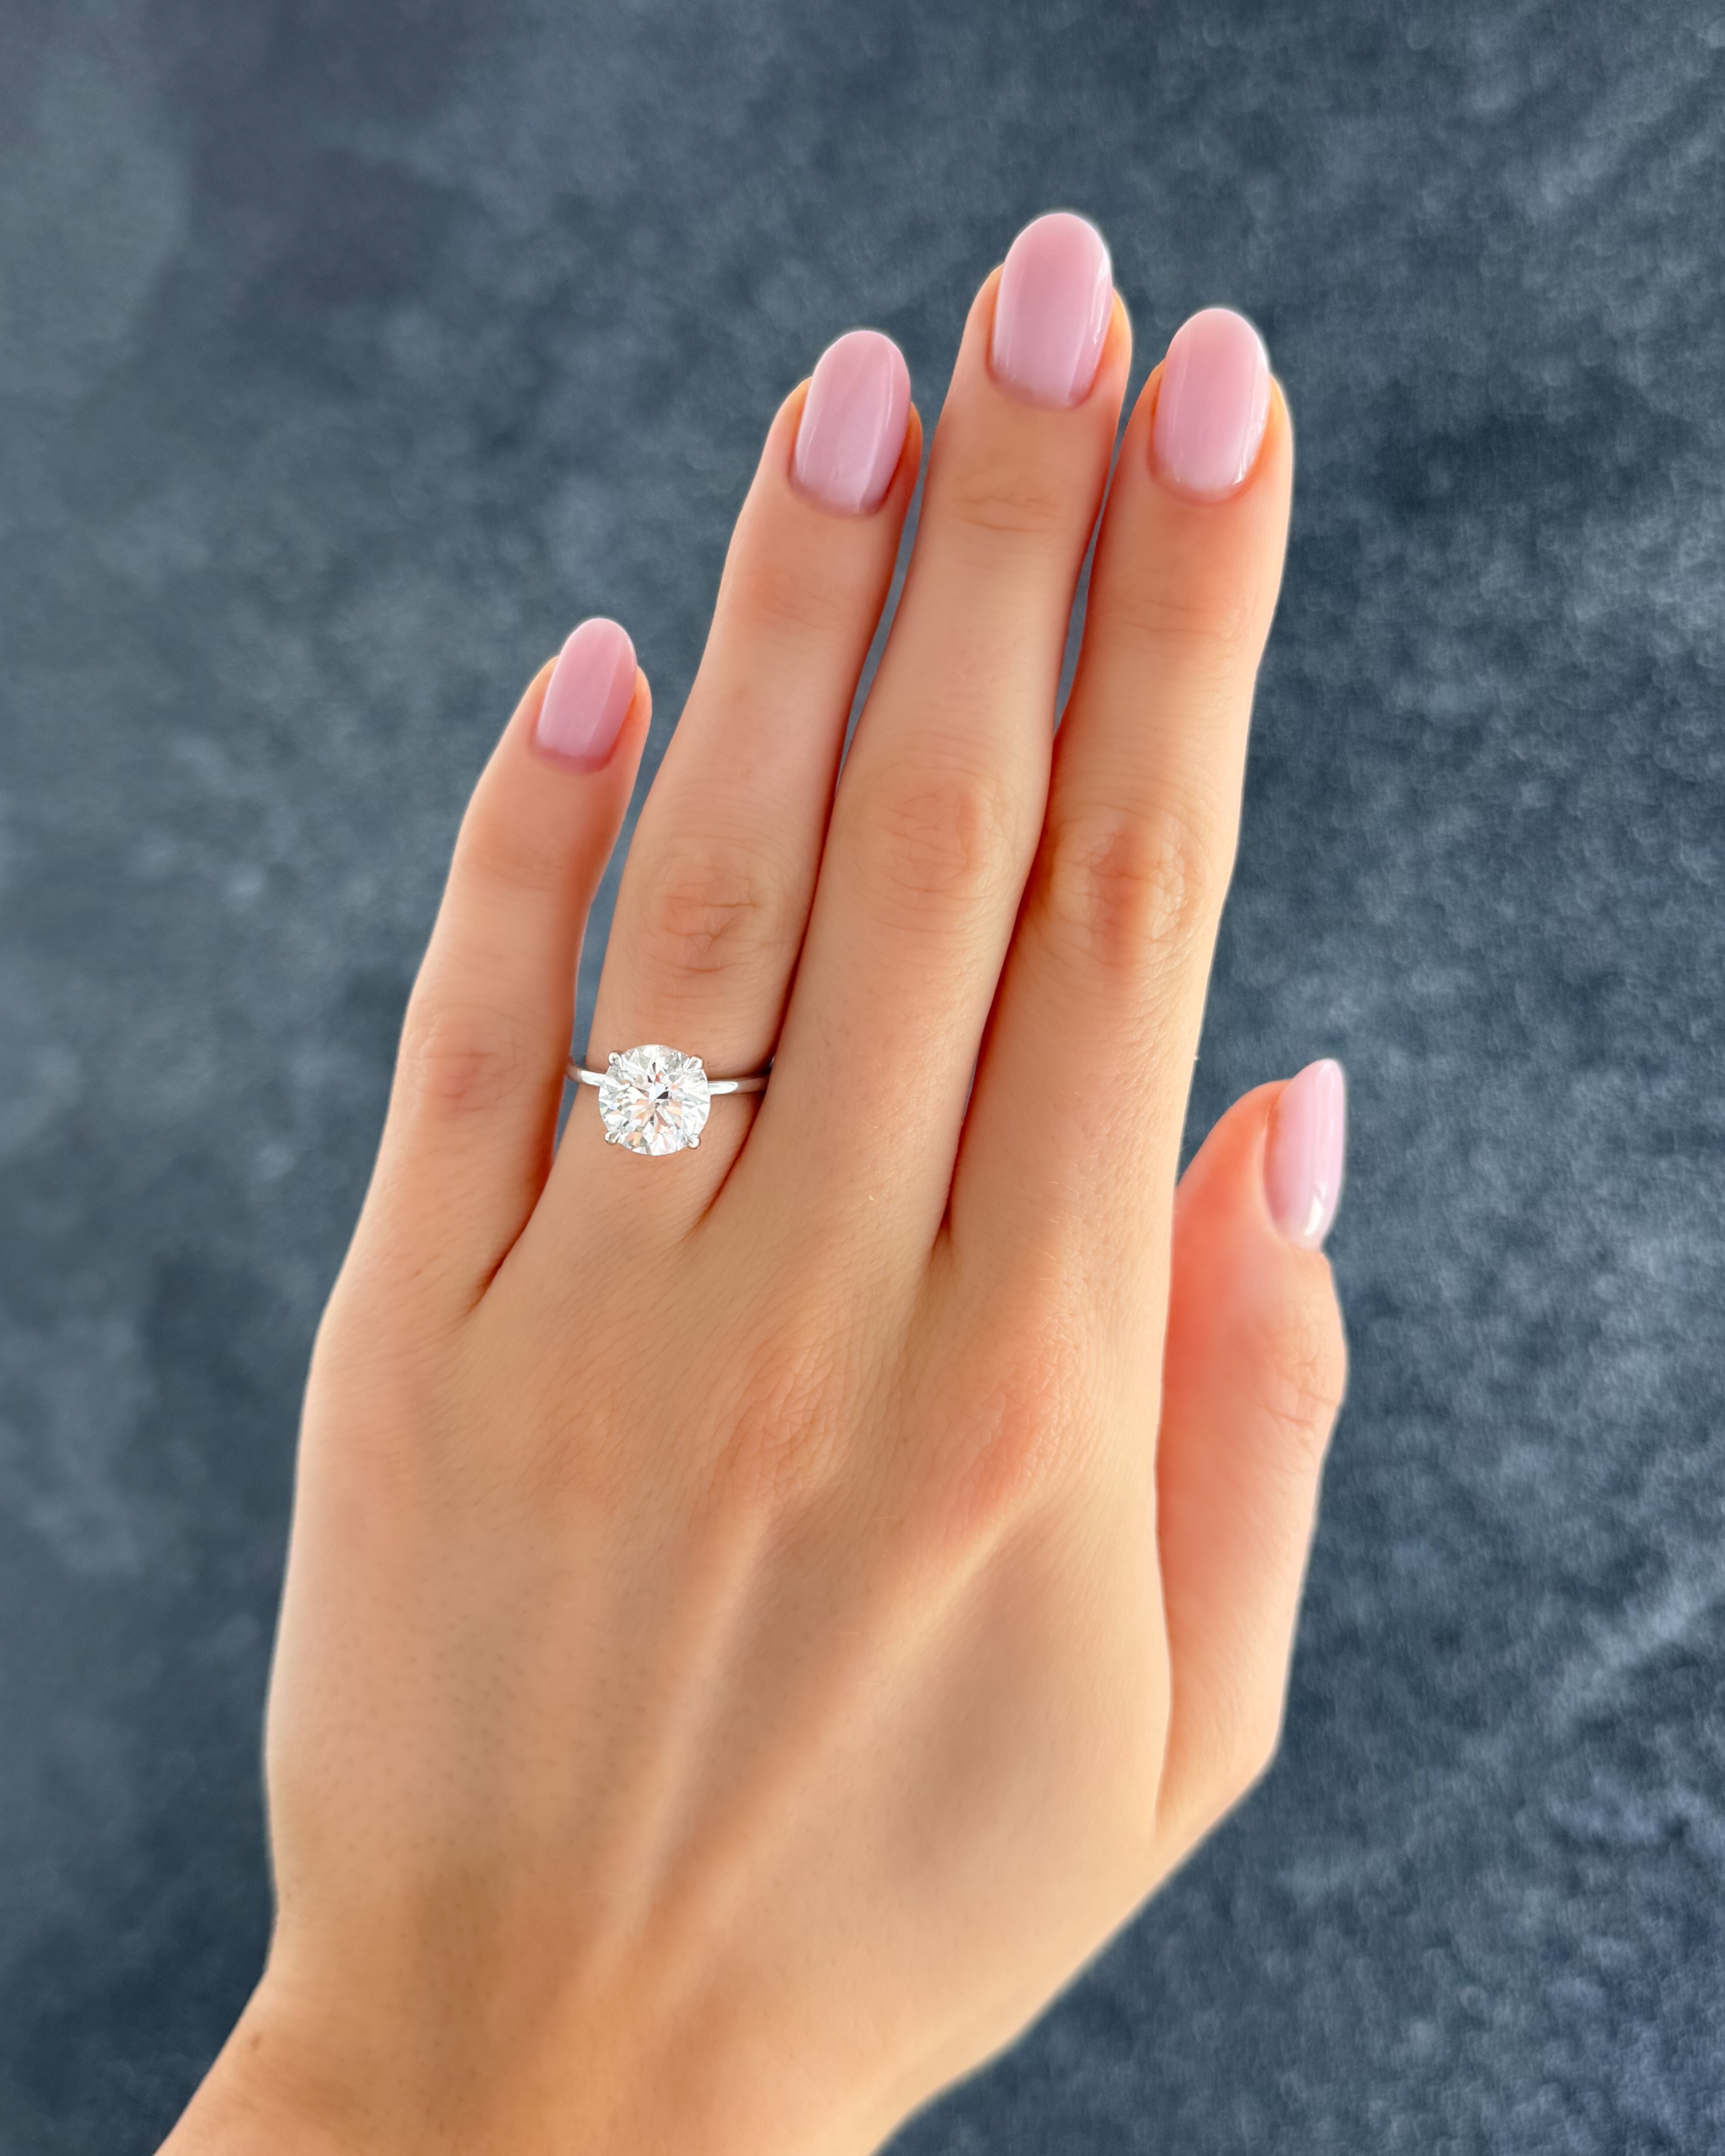 GOODSTONE Thin + Simple Solitaire Engagement Ring With Round Brilliant Cut Diamond